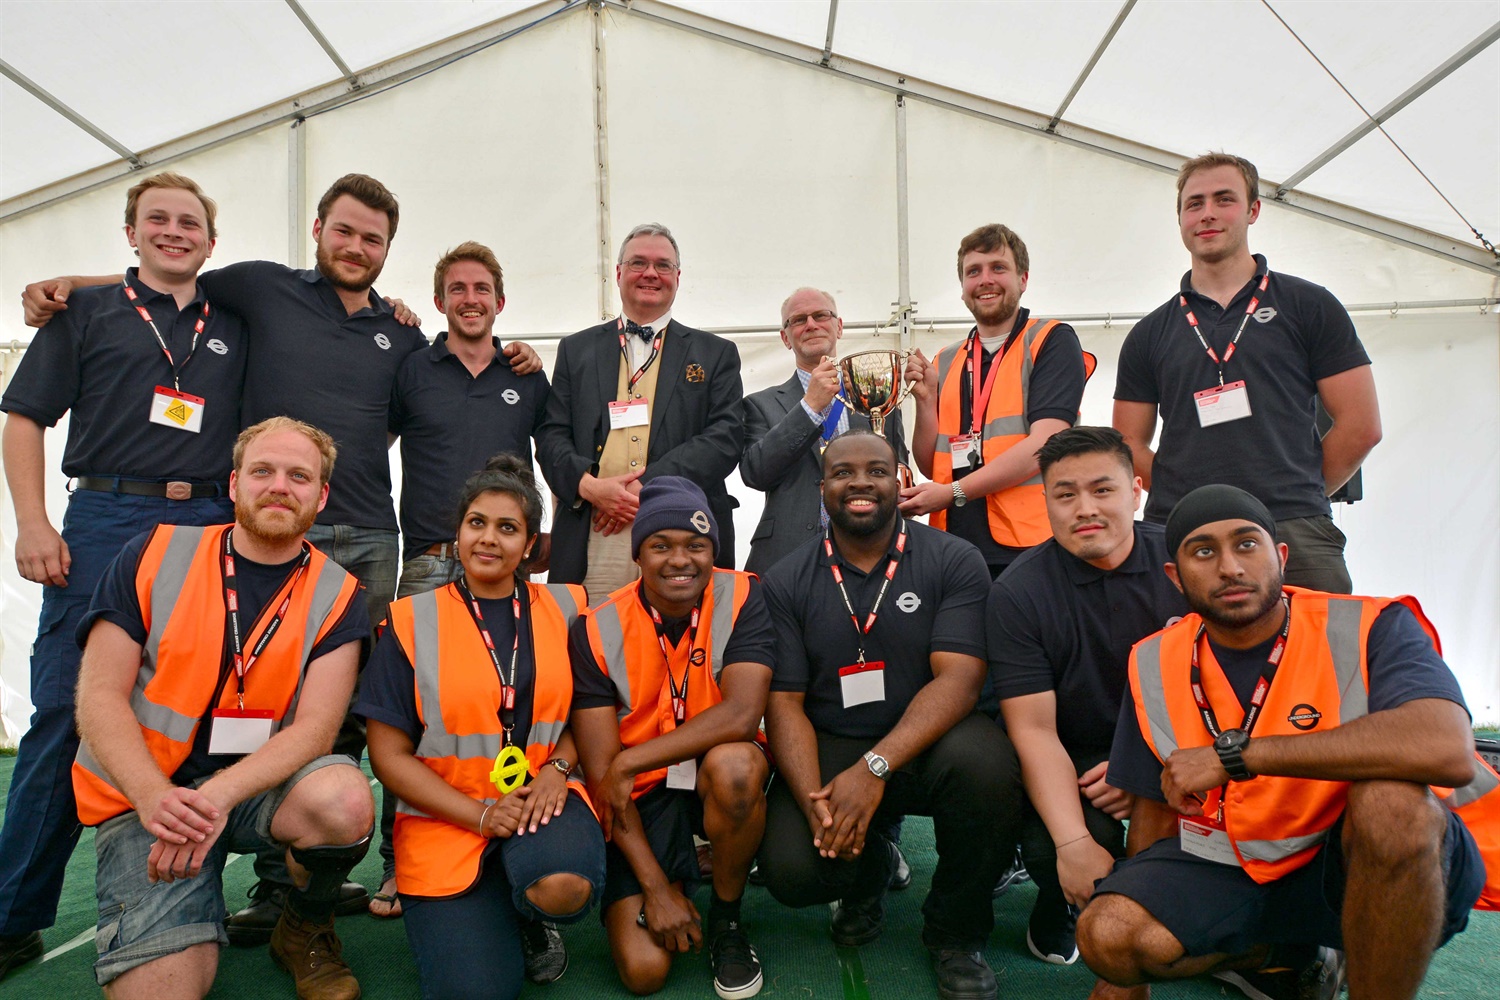 TFL team with Bill Reeve and IMechE President courtesy of David Shirres